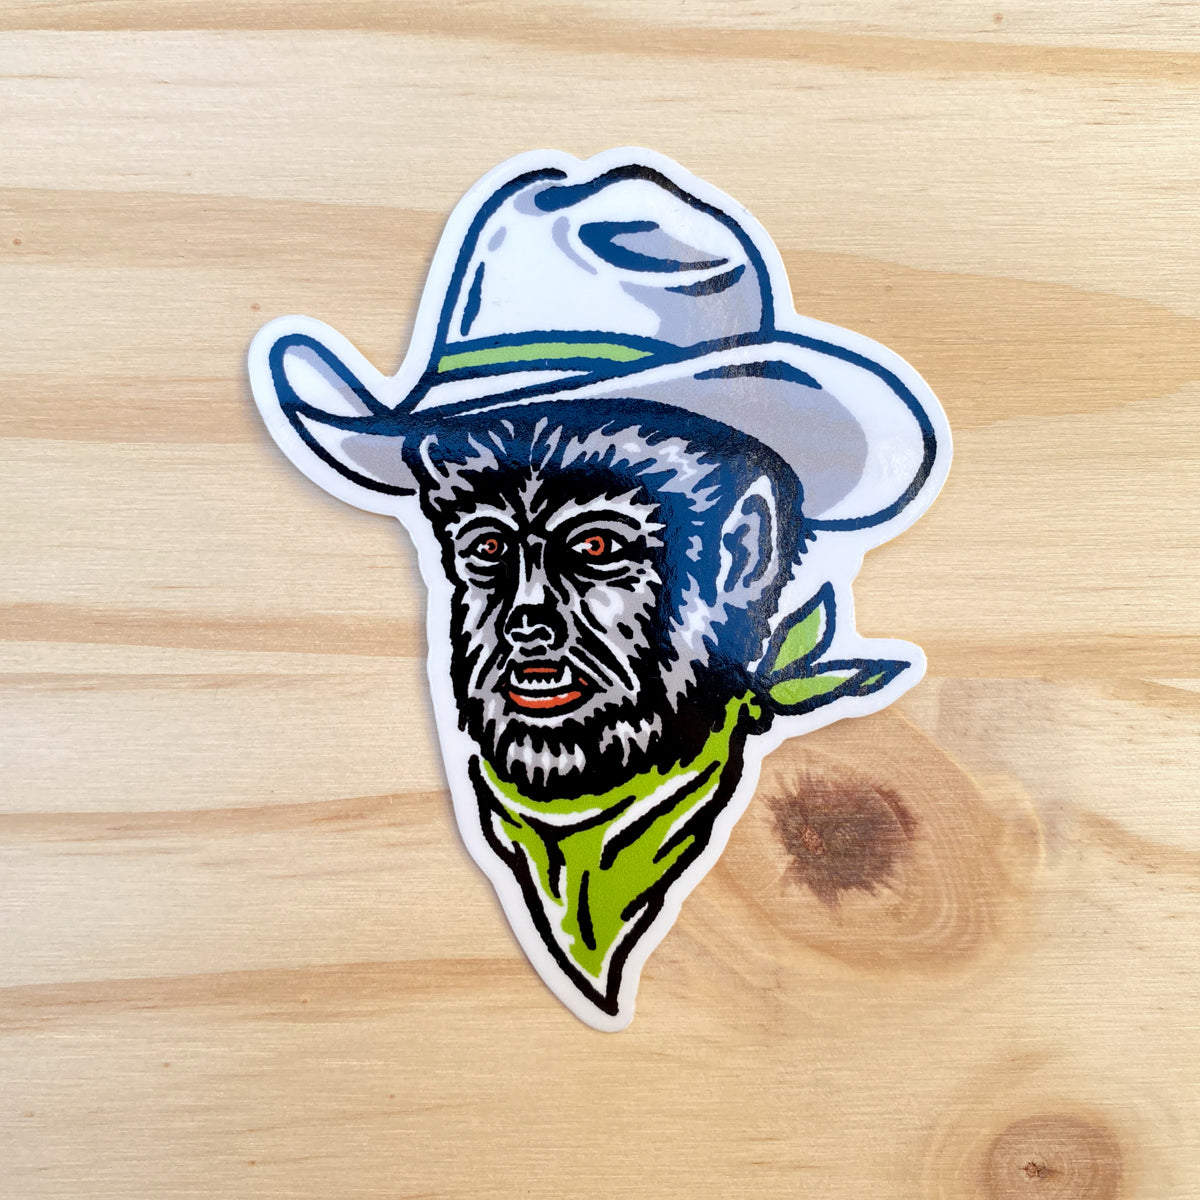 Cowboy Monsters Sticker Pack